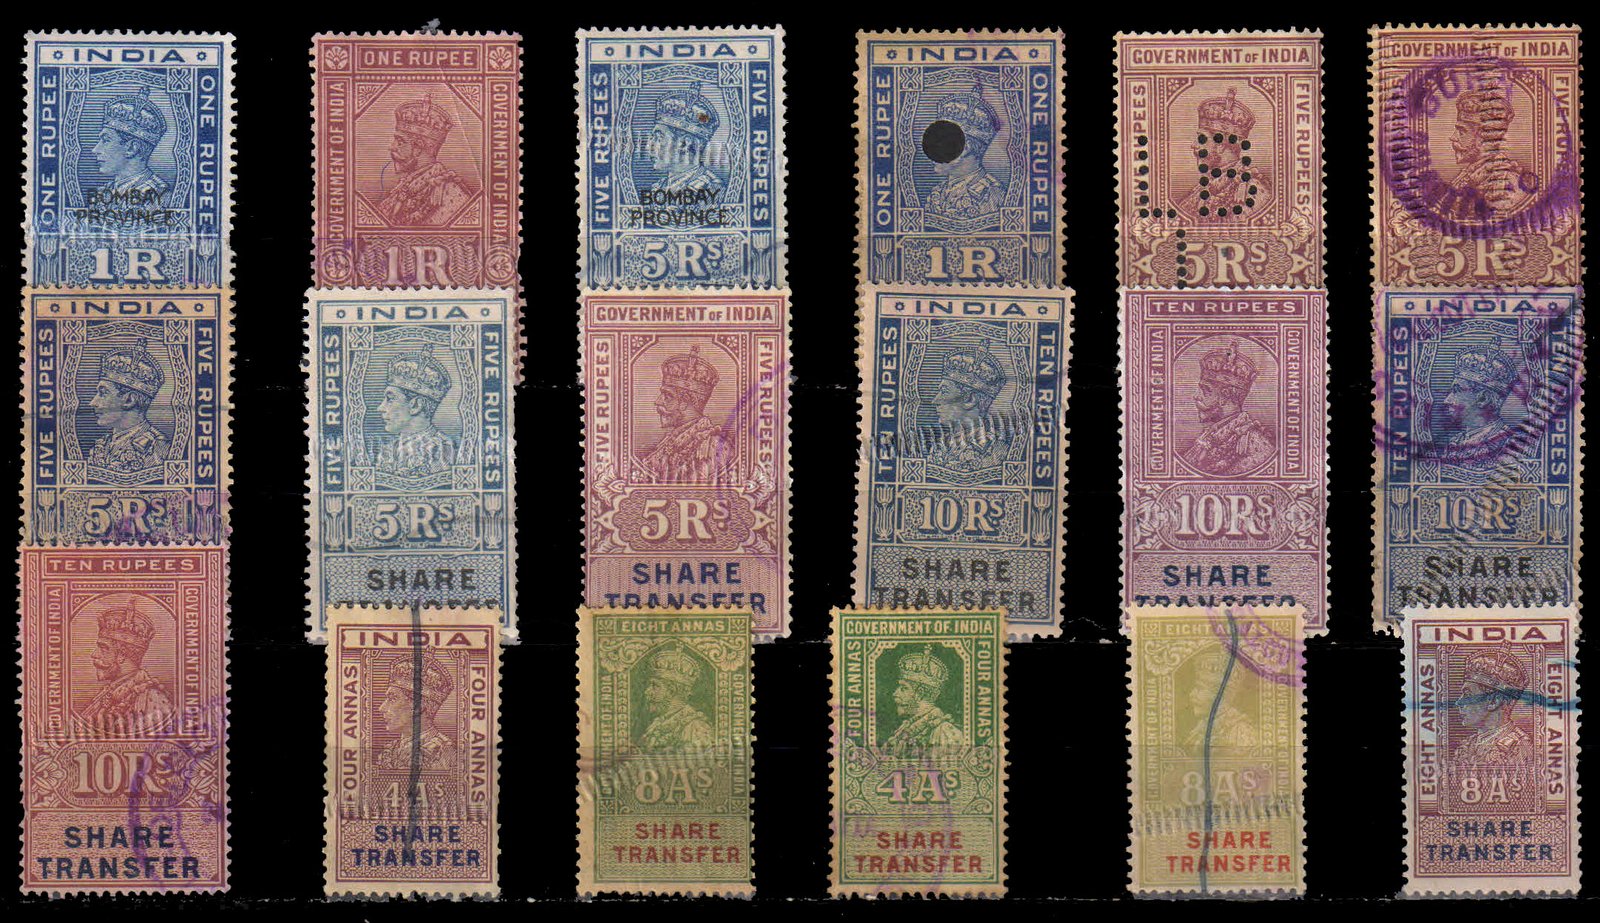 INDIA PRE INDEPENDENCE - K.G. V & K.G. VI-Share Transfer 18 Different Used Stamps-Revenue-Fiscal-Good Condition as per Scan